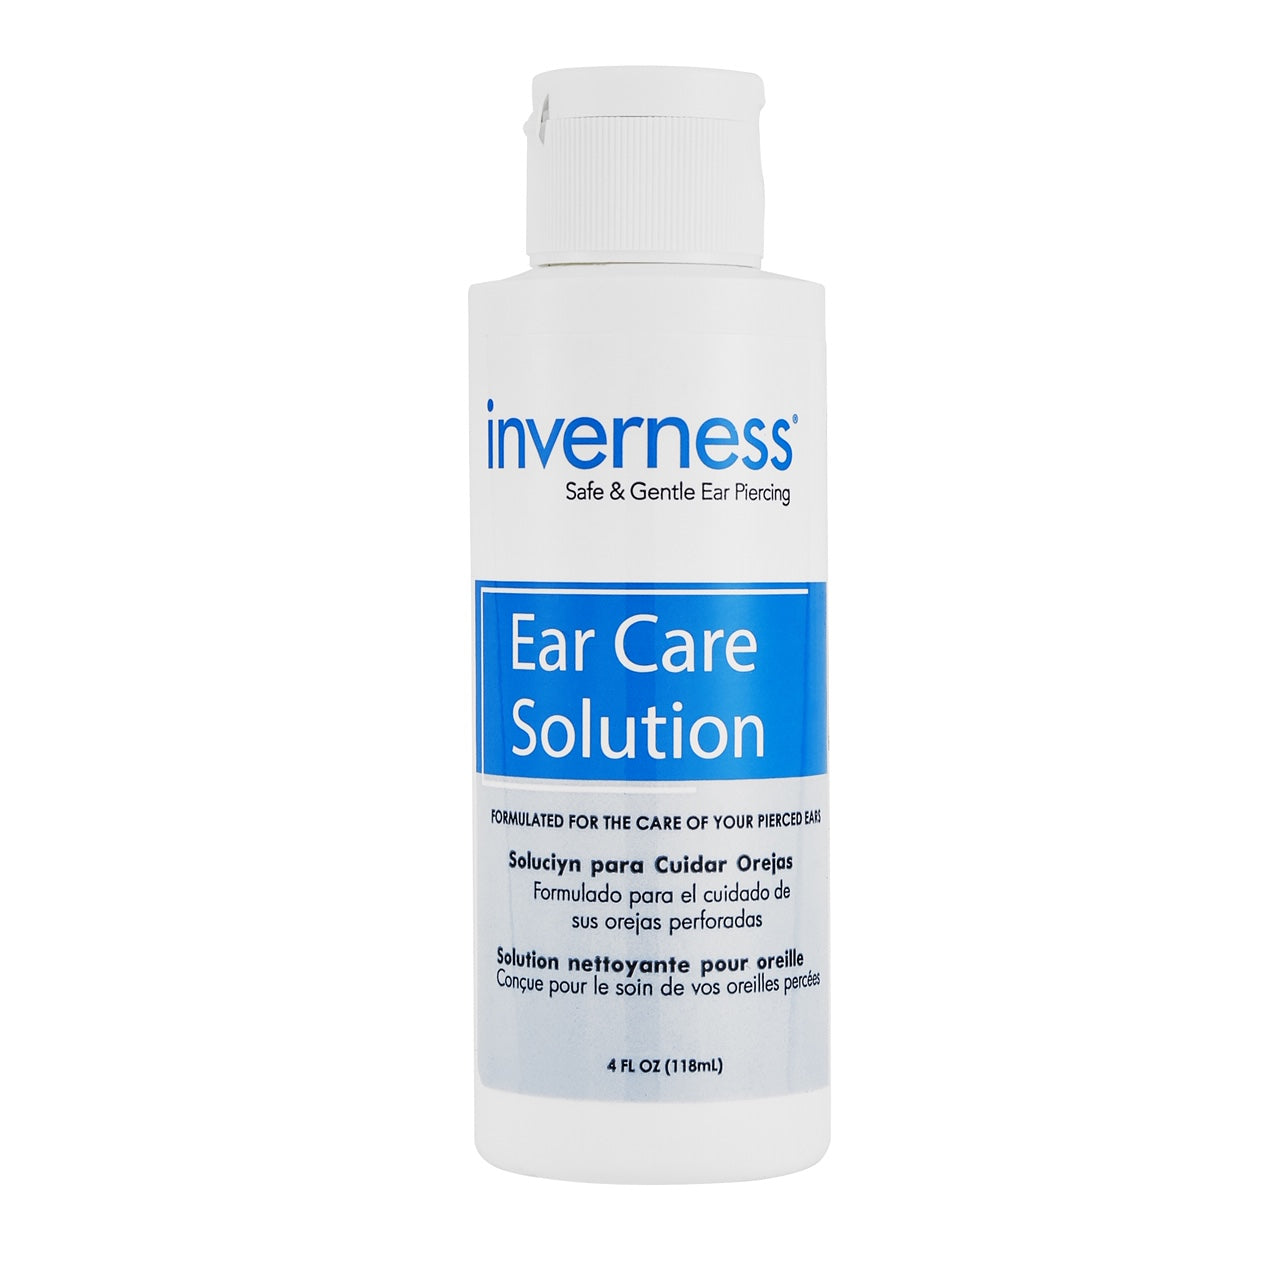 Inverness® Ear Care Solution